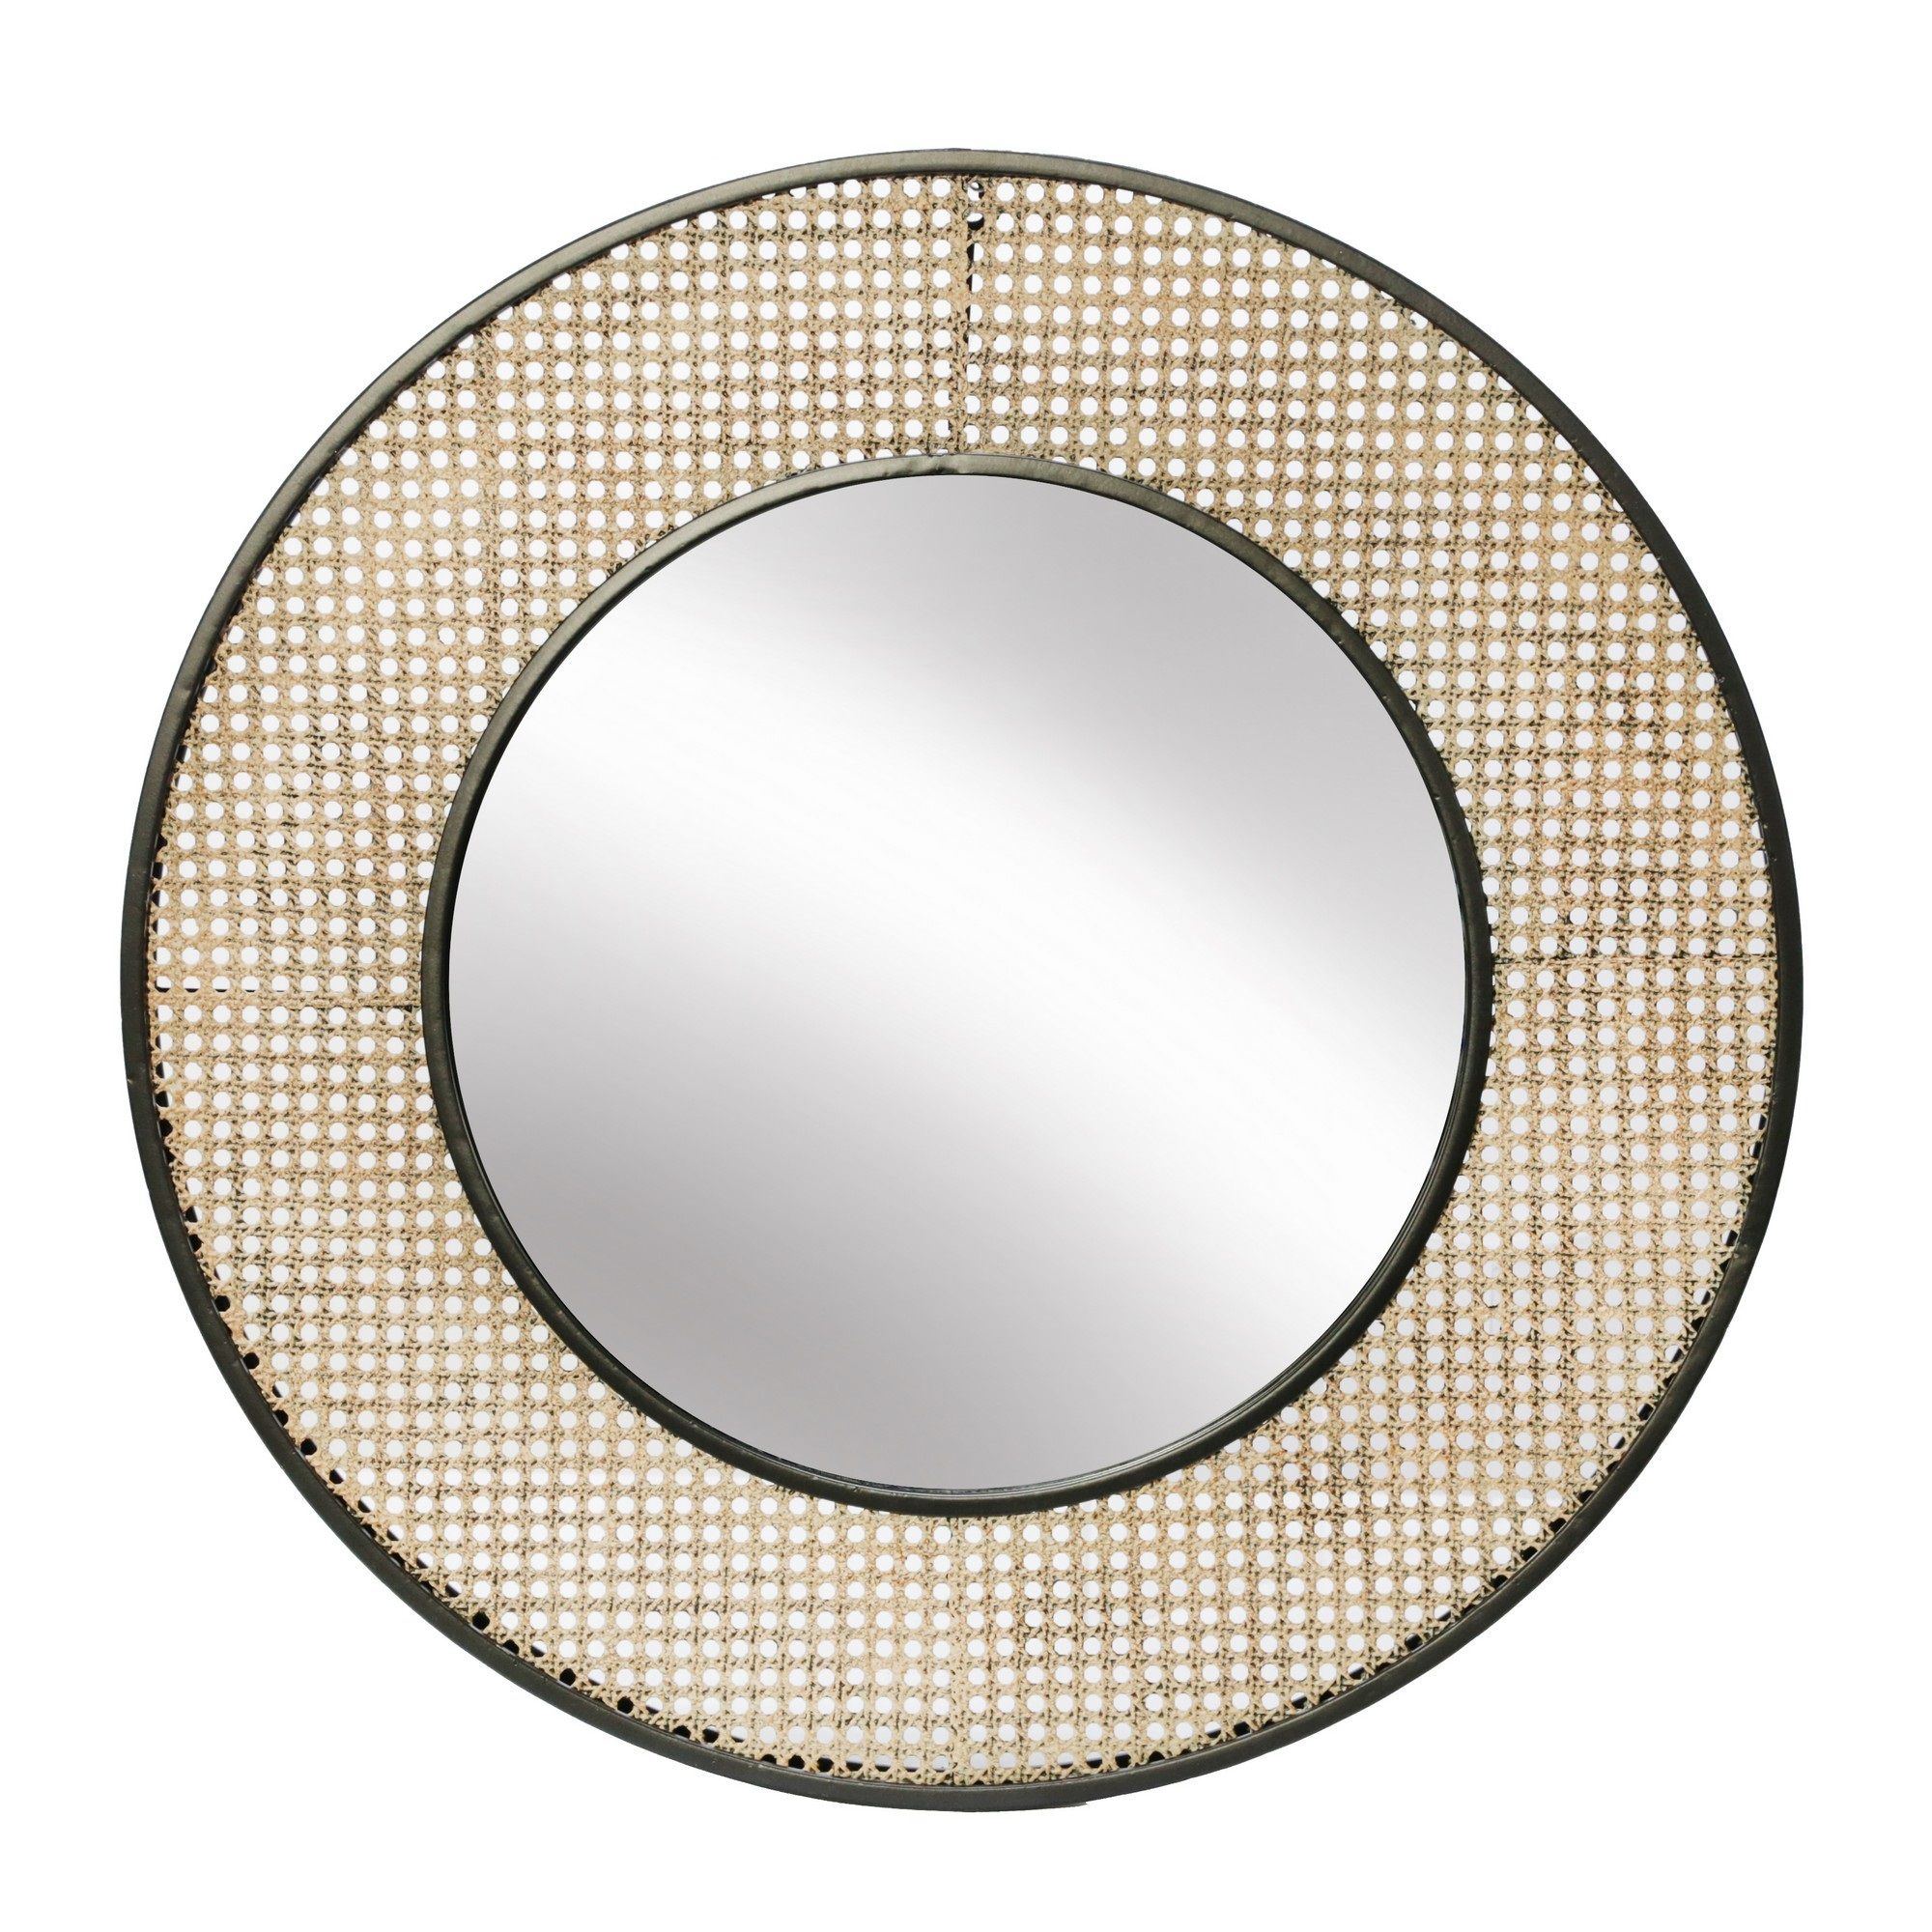 Metal Frame Wicker Round Mirror with Wooden Backing, Brown and Black | Walmart (US)